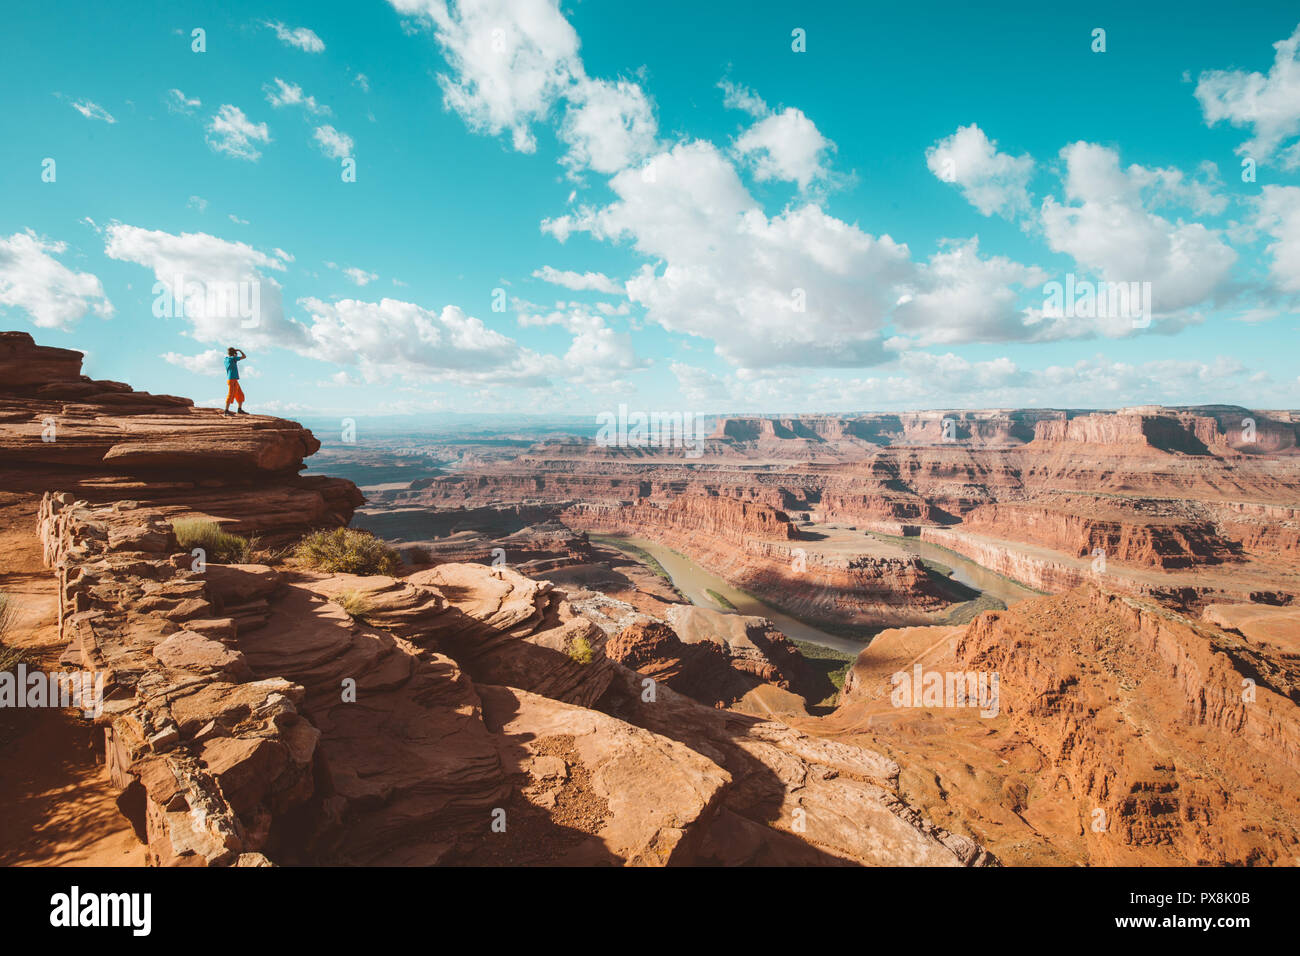 A young male hiker is standing on the edge of a cliff enjoying a dramatic view of the famous Colorado River, Dead Horse Point State Park, Utah, USA Stock Photo